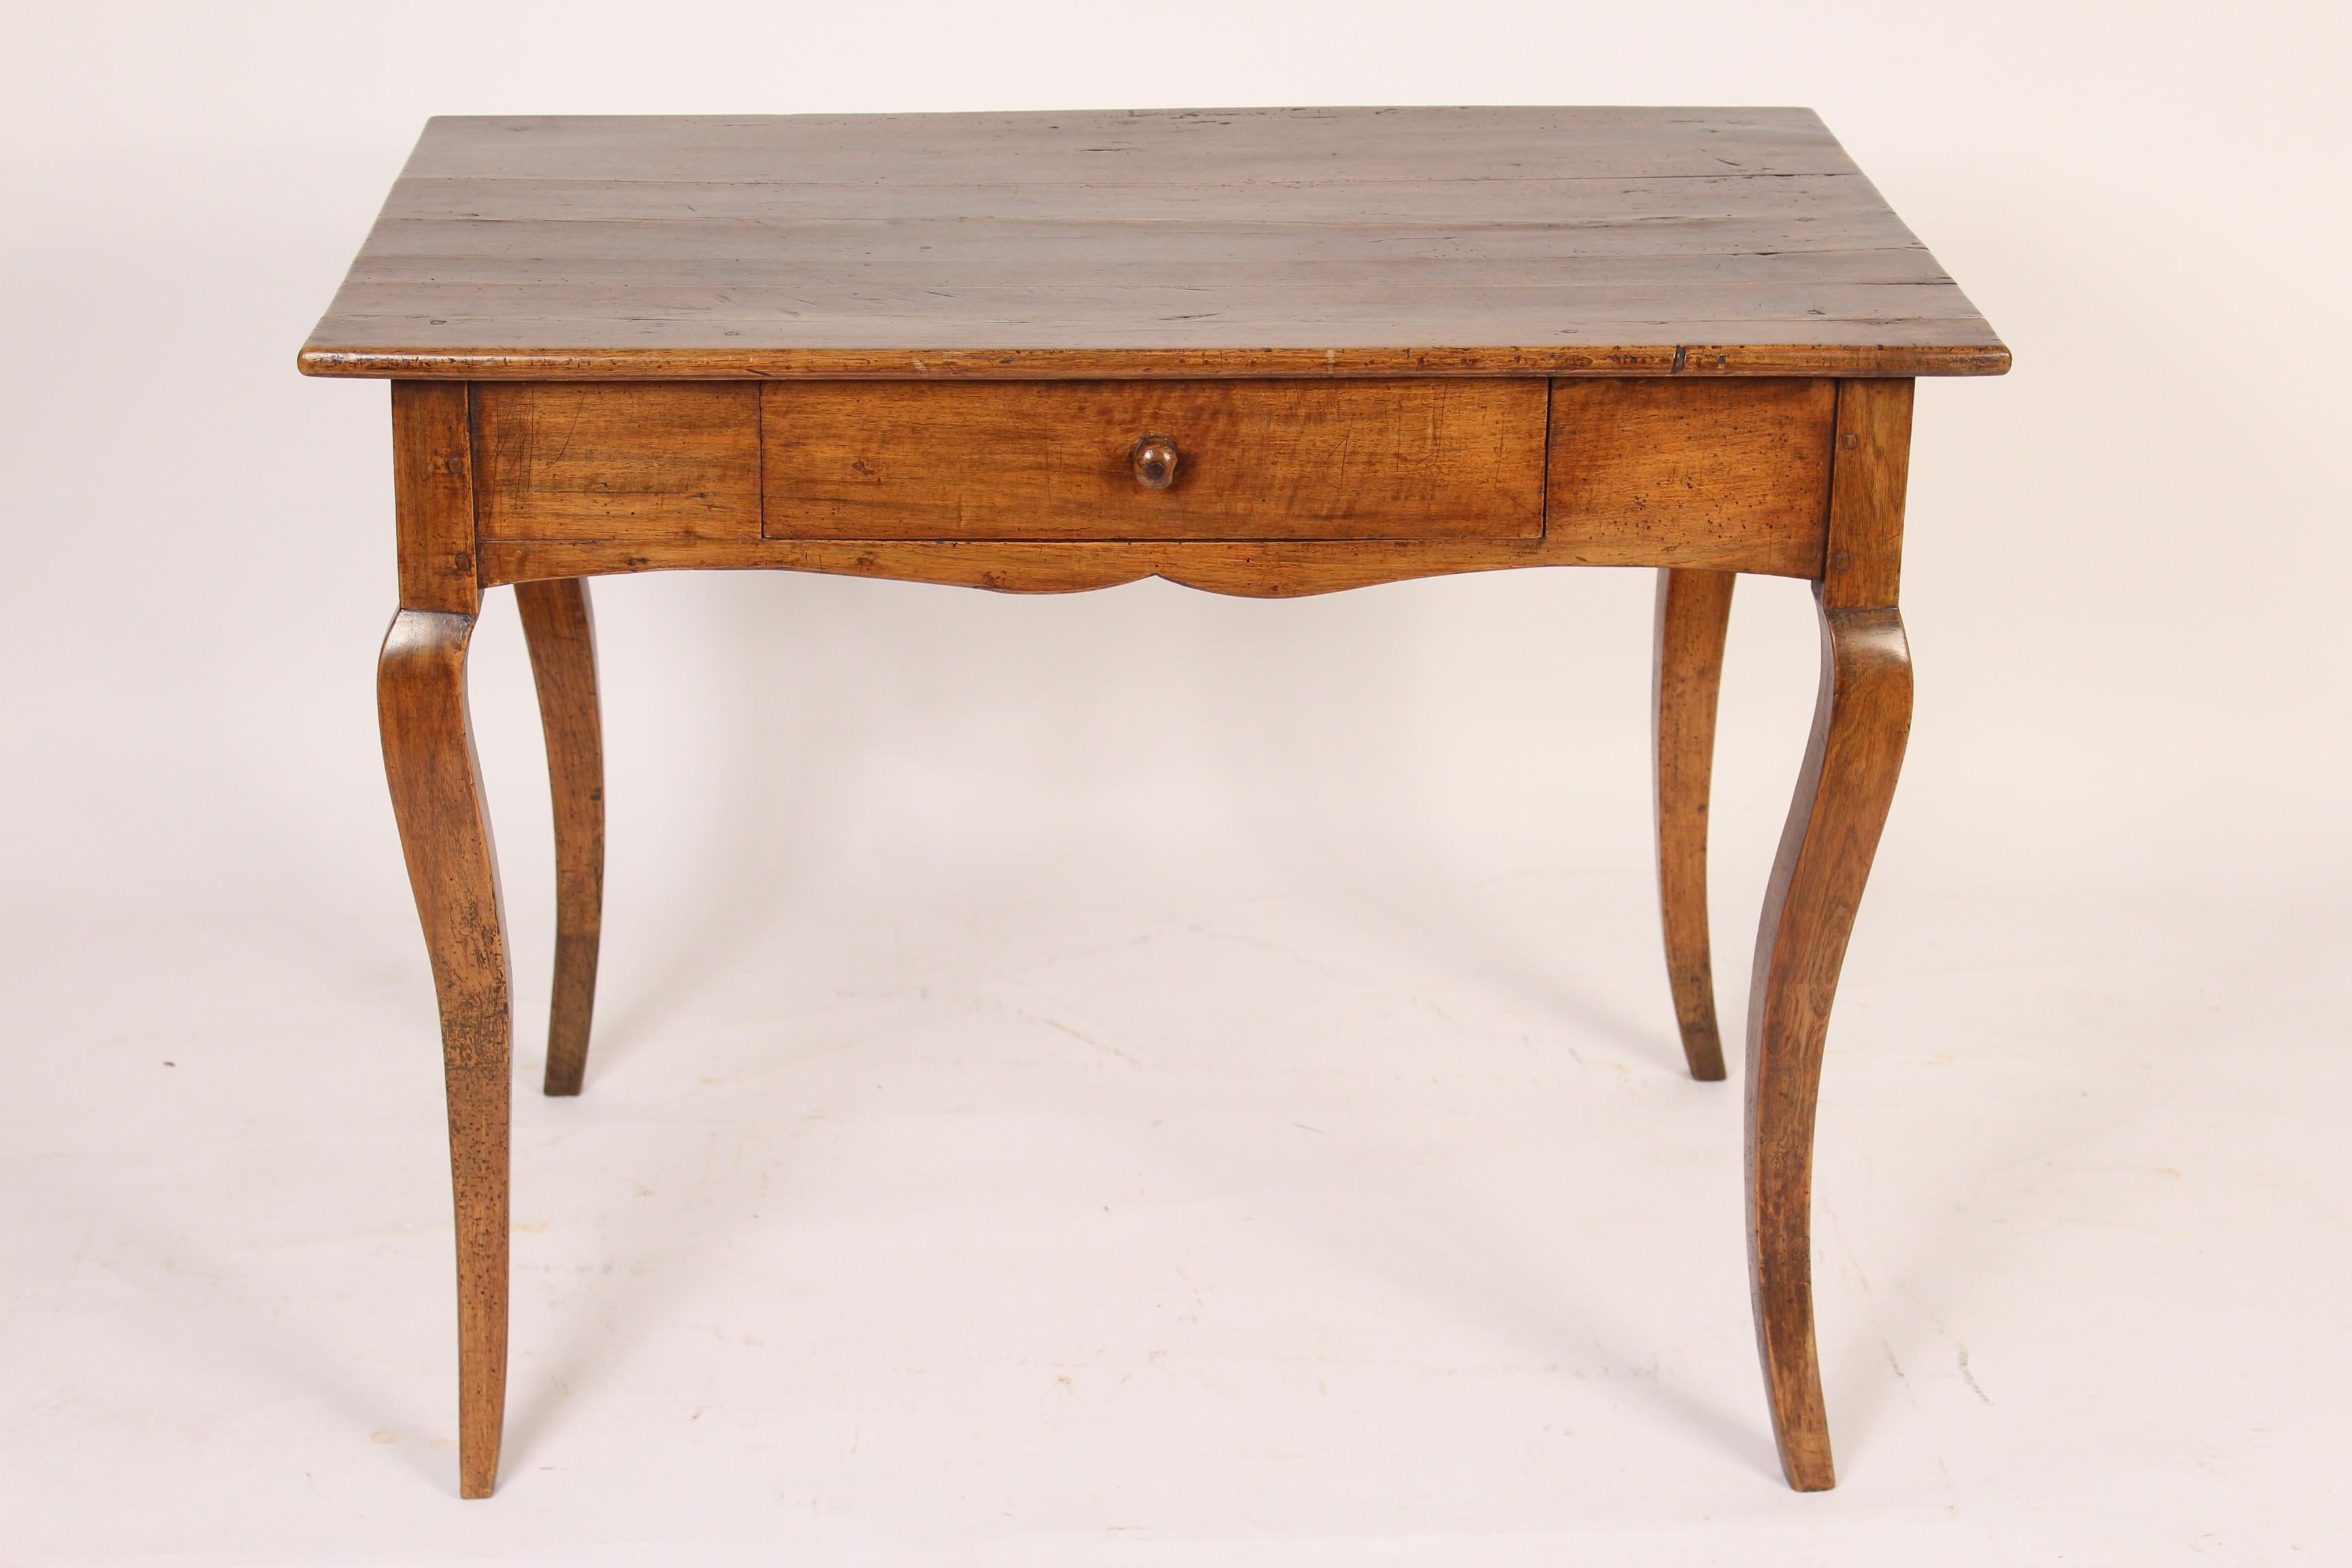 Antique Louis XV style provincial walnut and beechwood single drawer writing / occasional table, 19th century.